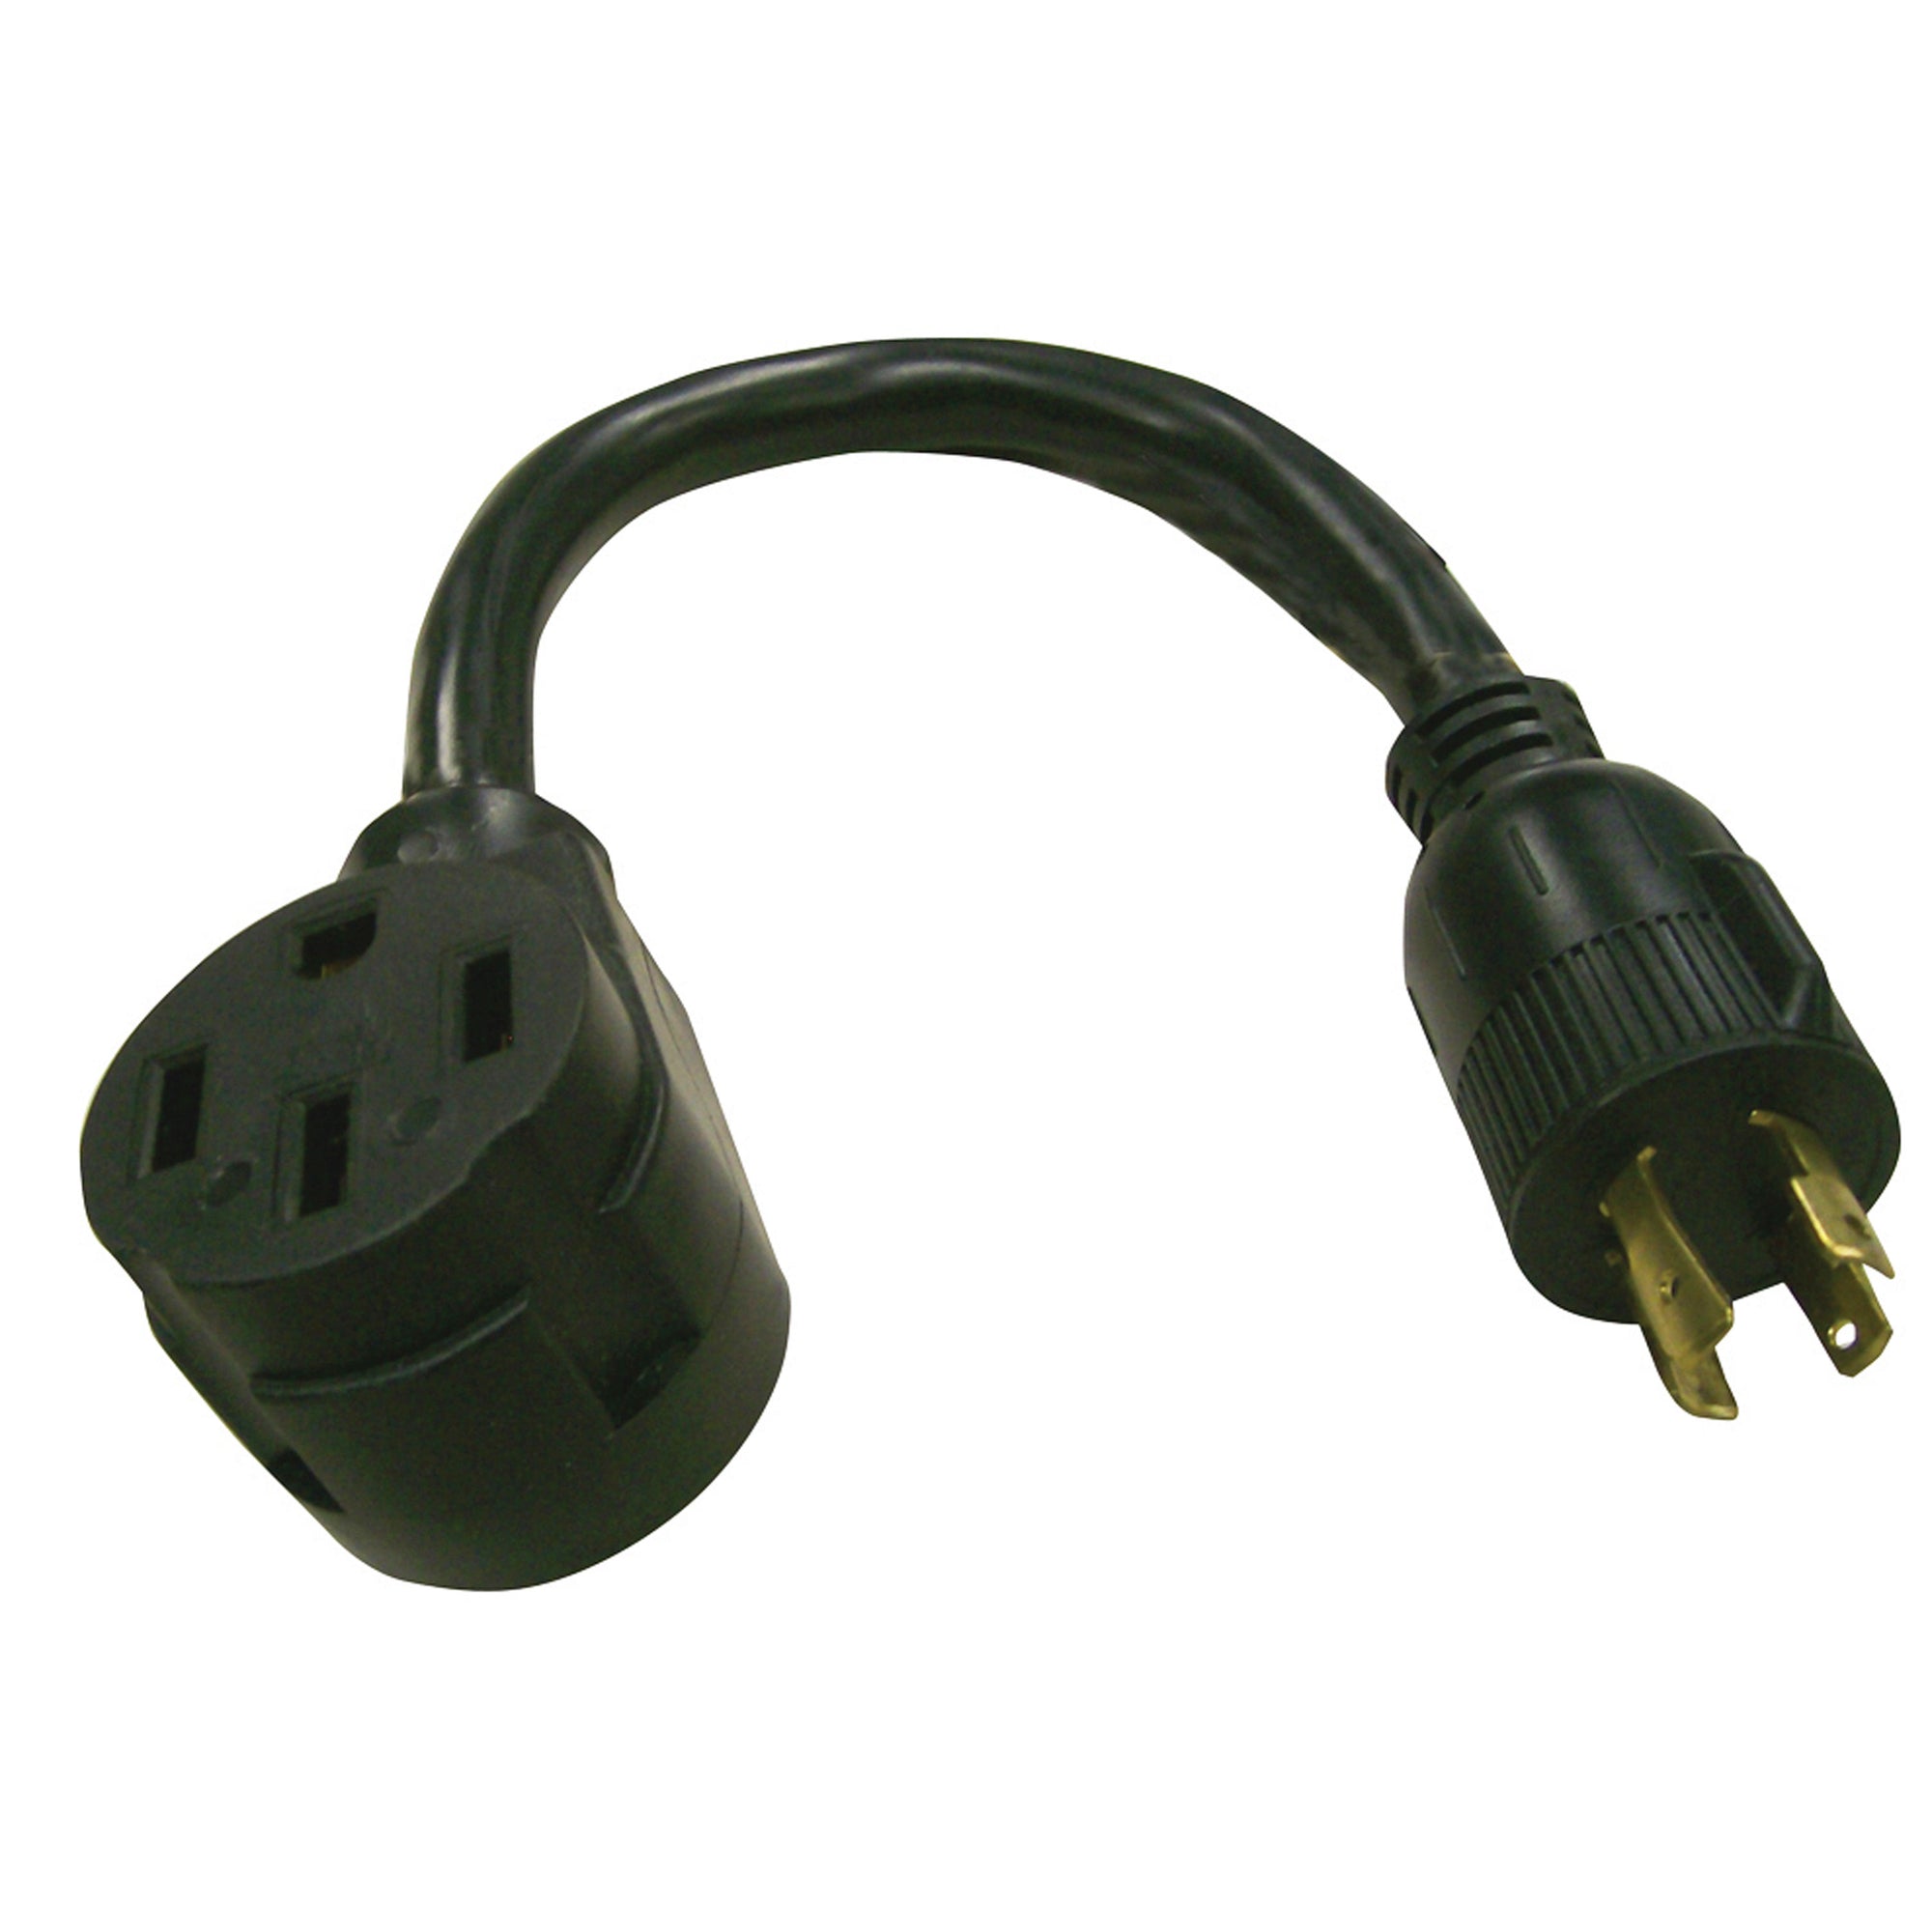 Valterra A10-G30450VP Mighty Cord 12" Generator Adapter Cord - 4-Prong, 30AM to 50AF